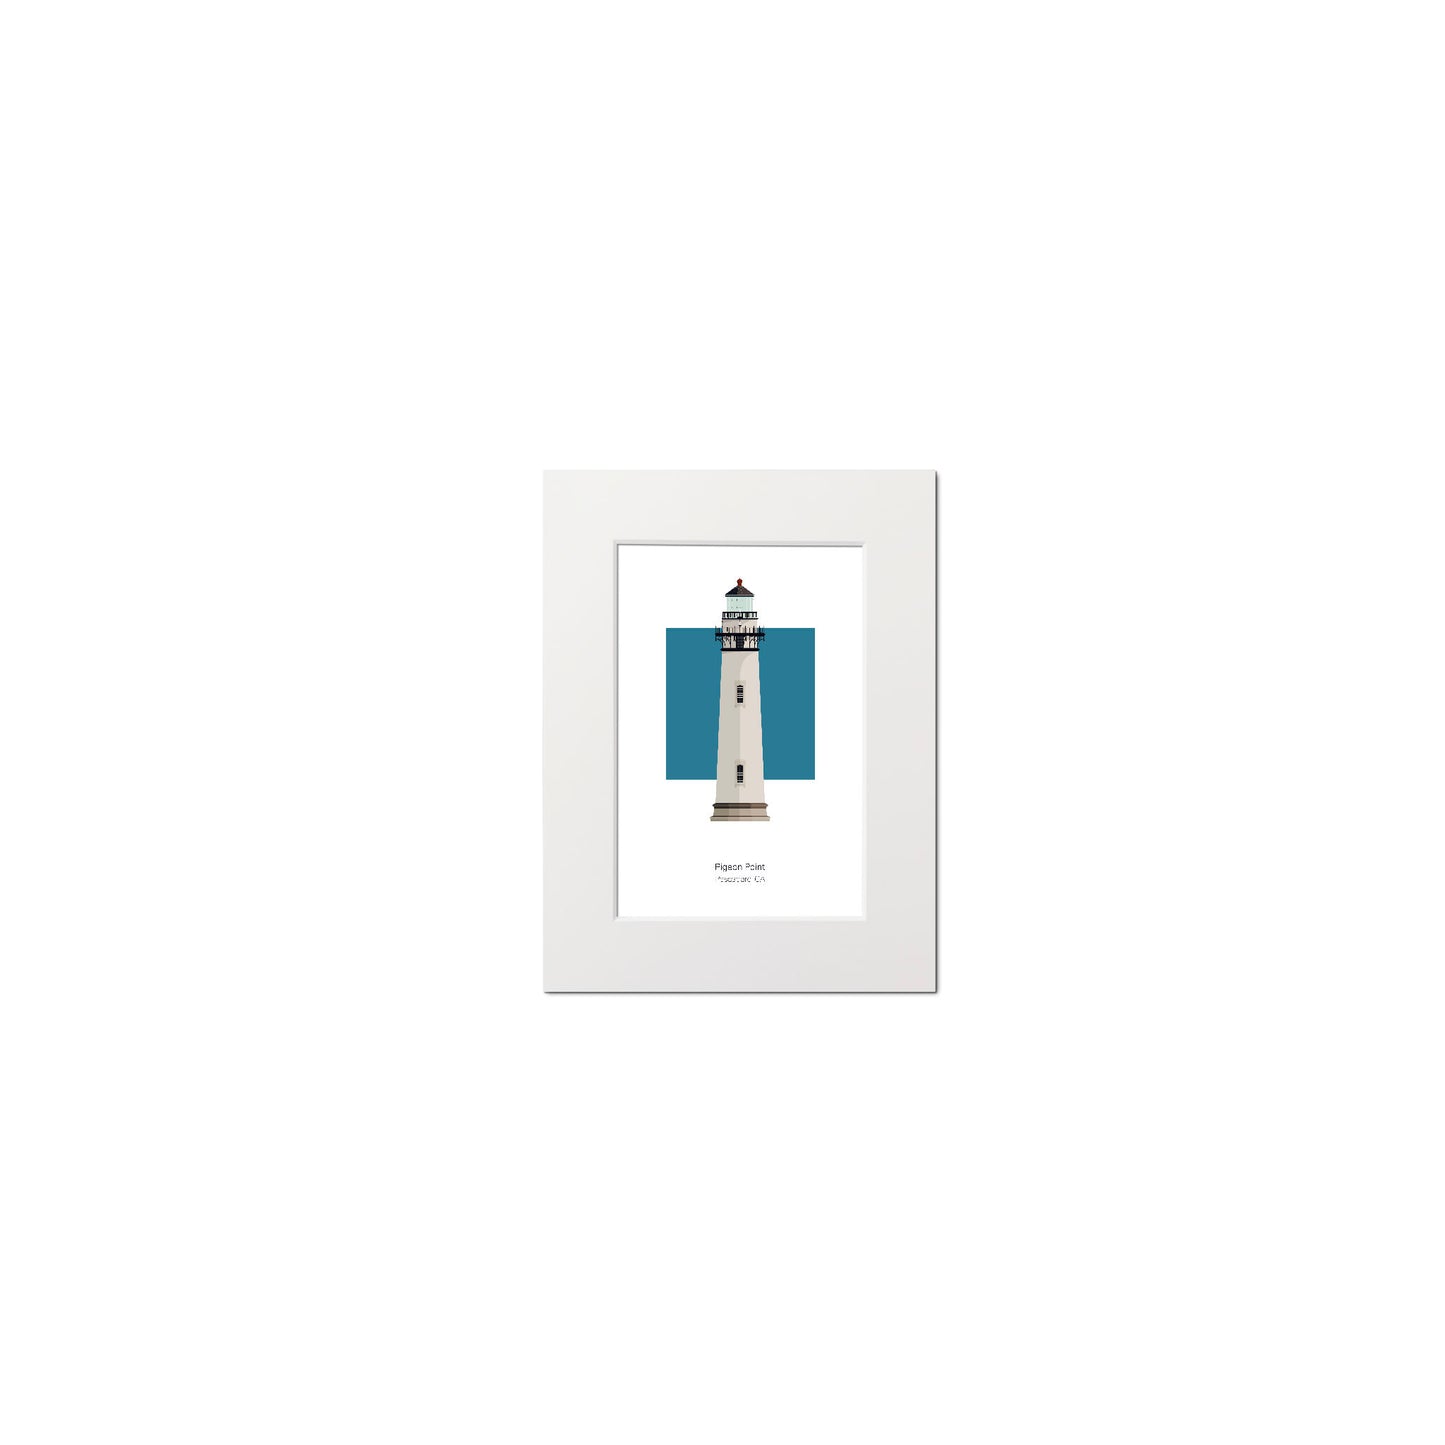 Illustration of the Pigeon Point lighthouse, California, USA. On a white background with aqua blue square as a backdrop., mounted and measuring 6"x8" (15x20cm).